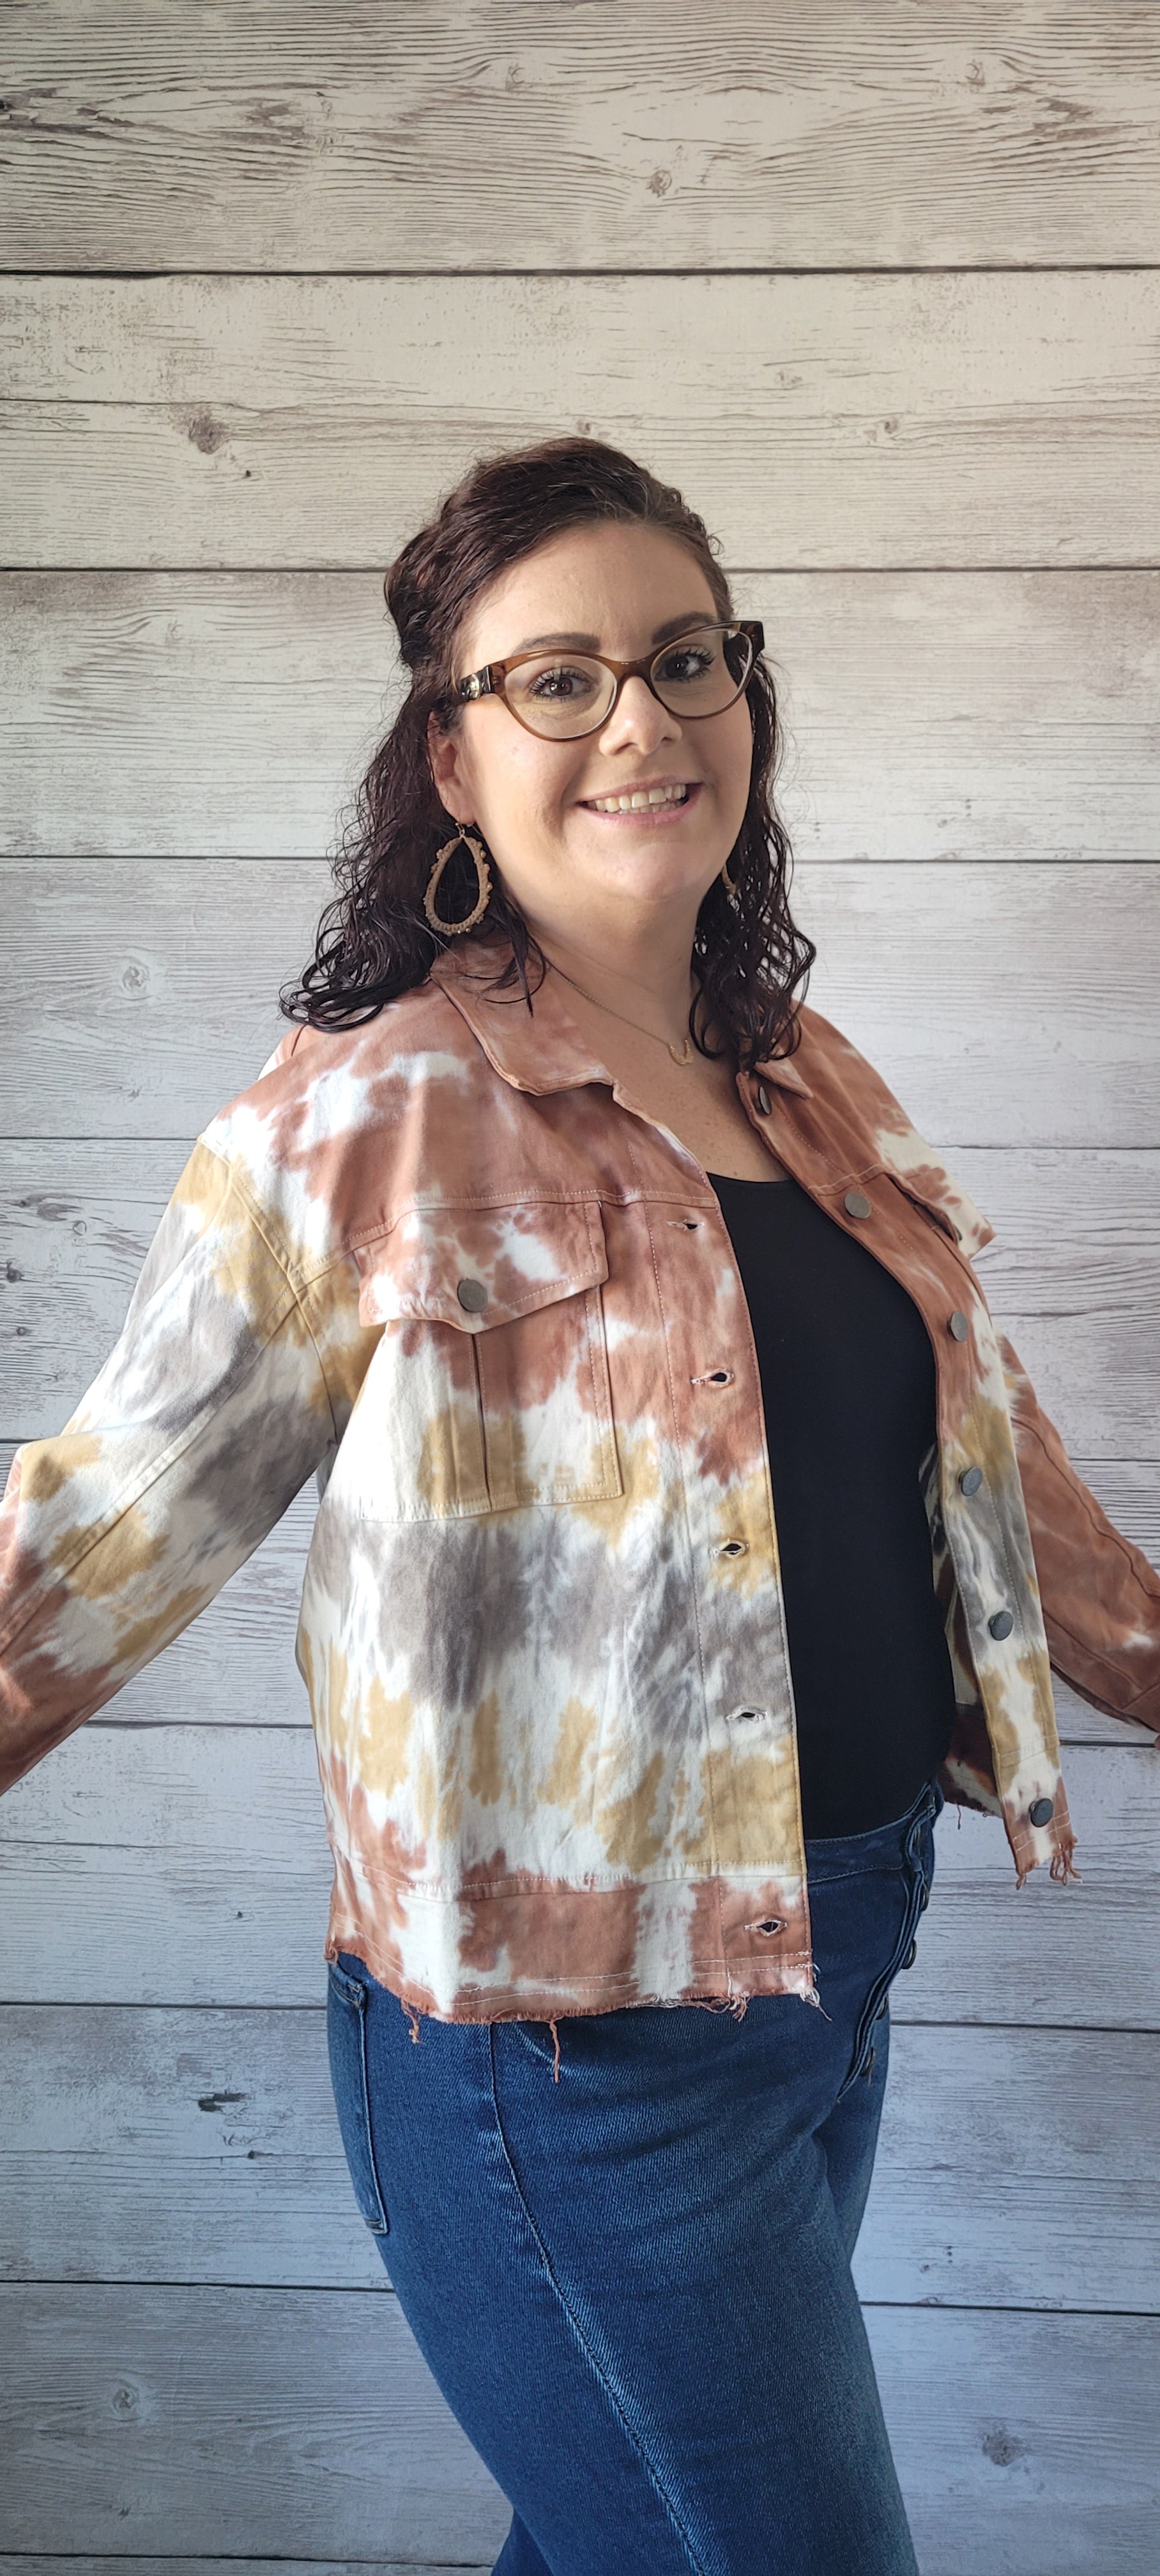 Make a statement with this adorable terracotta tie dye trucker jacket! Enjoy the unique style of this timeless piece featuring metal button closure, bust flap pockets, and distressed hem and cuff edges. Wearing this piece is sure to cause a stir; try it and let the compliments roll in! Sizes small through large.